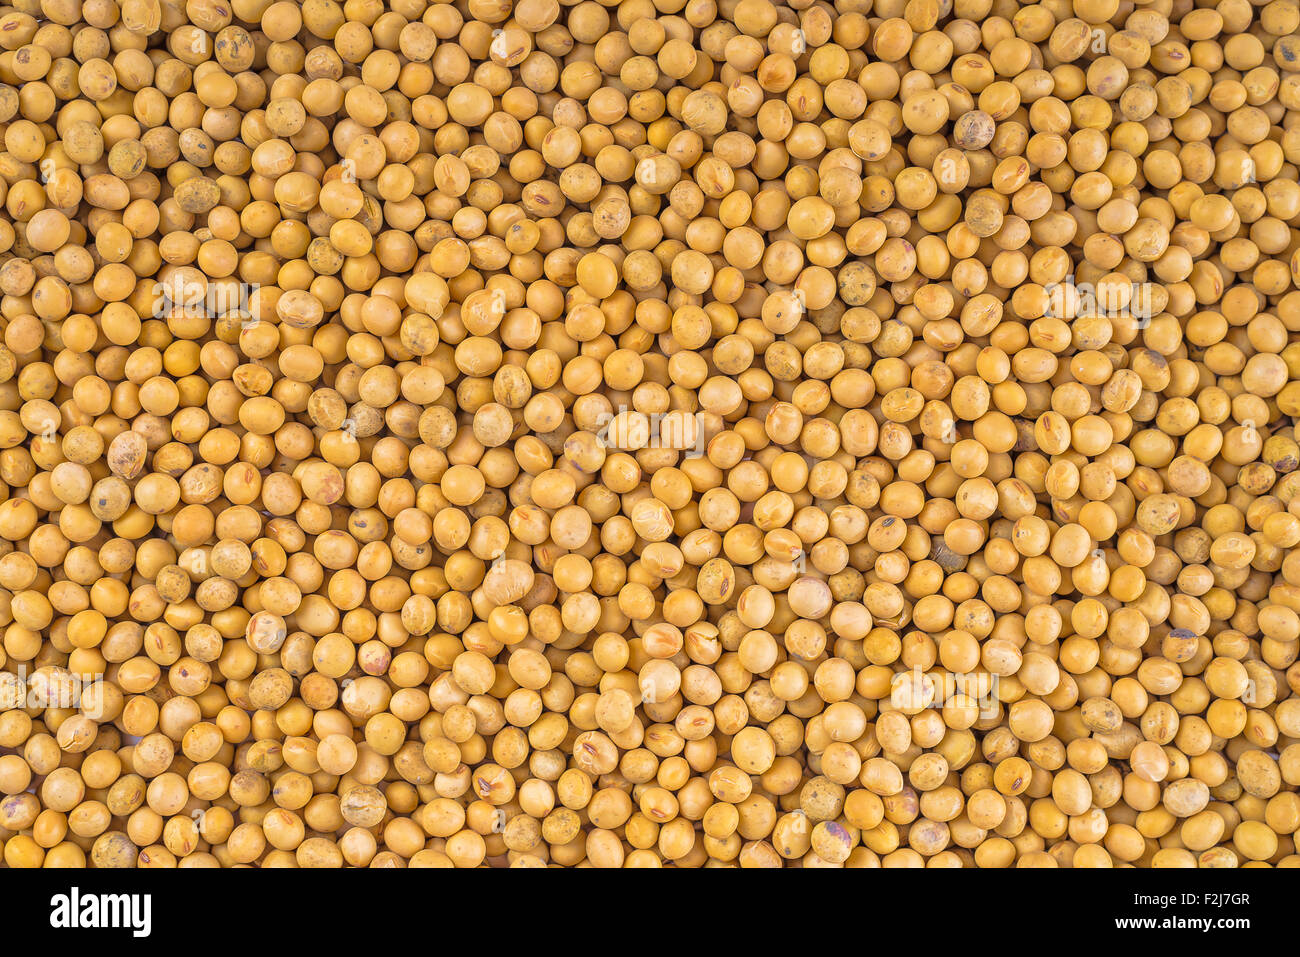 Soy bean as full frame texture, top view from above. Stock Photo